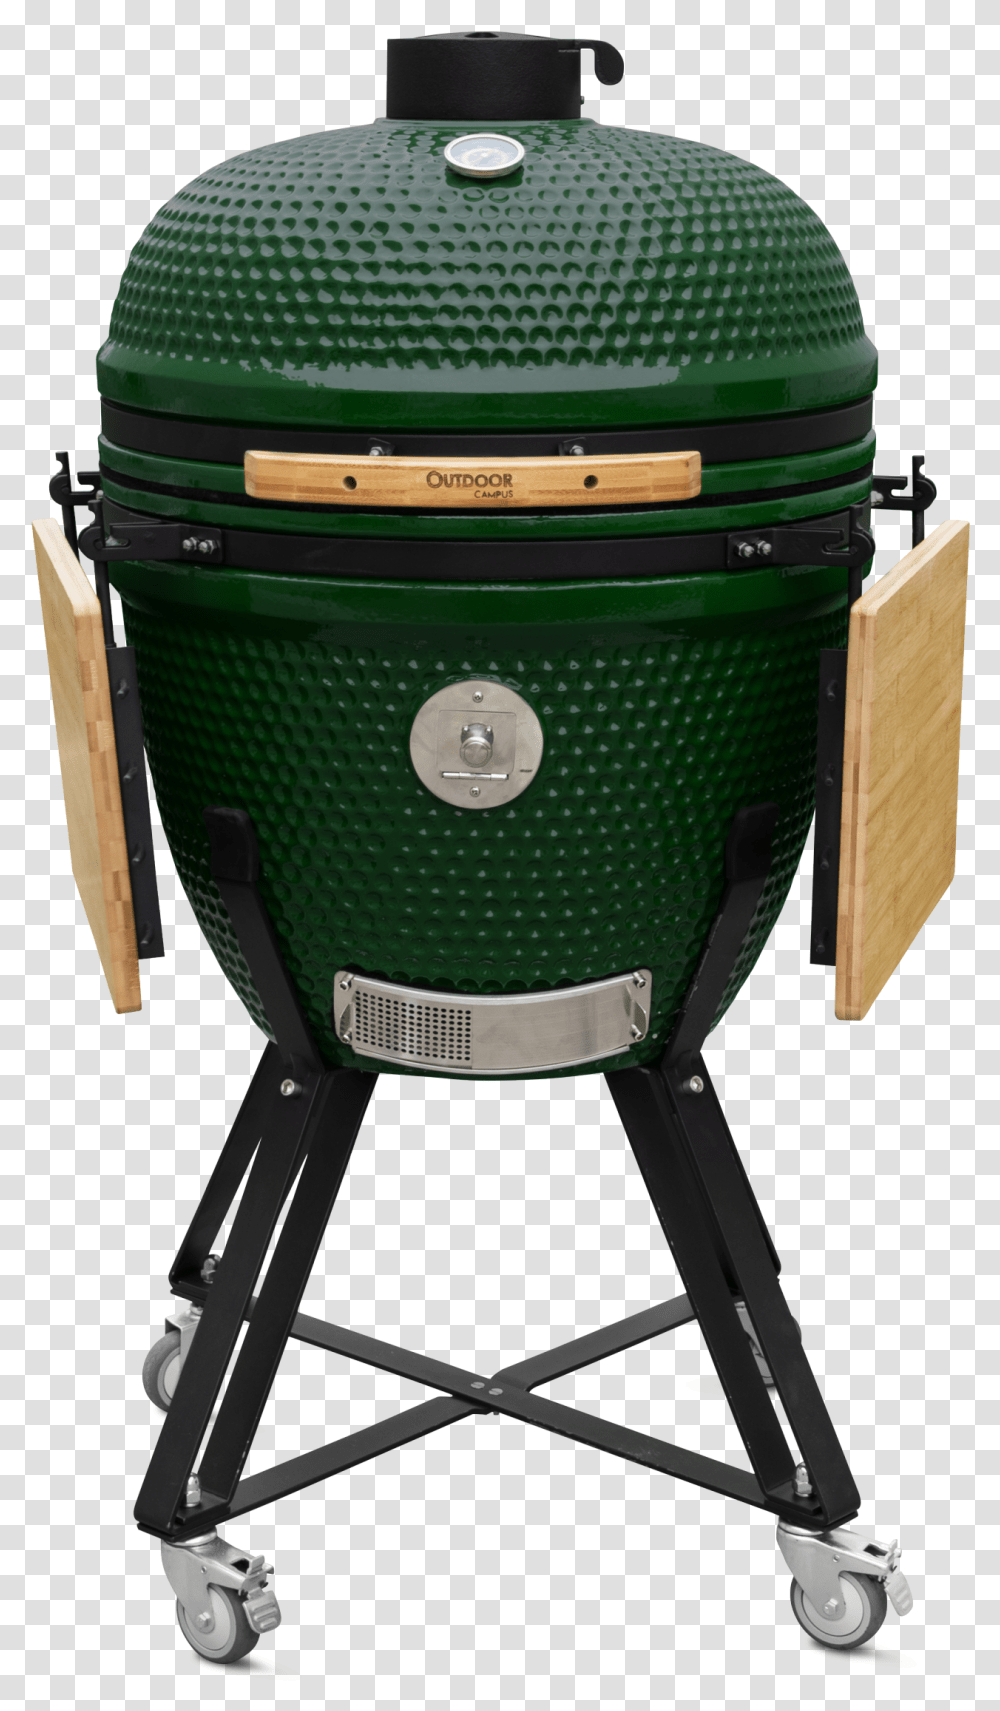 Charcoal Barbecue With Ceramic Bowl And Lid Kamado, Chair, Furniture, Outdoors, Appliance Transparent Png